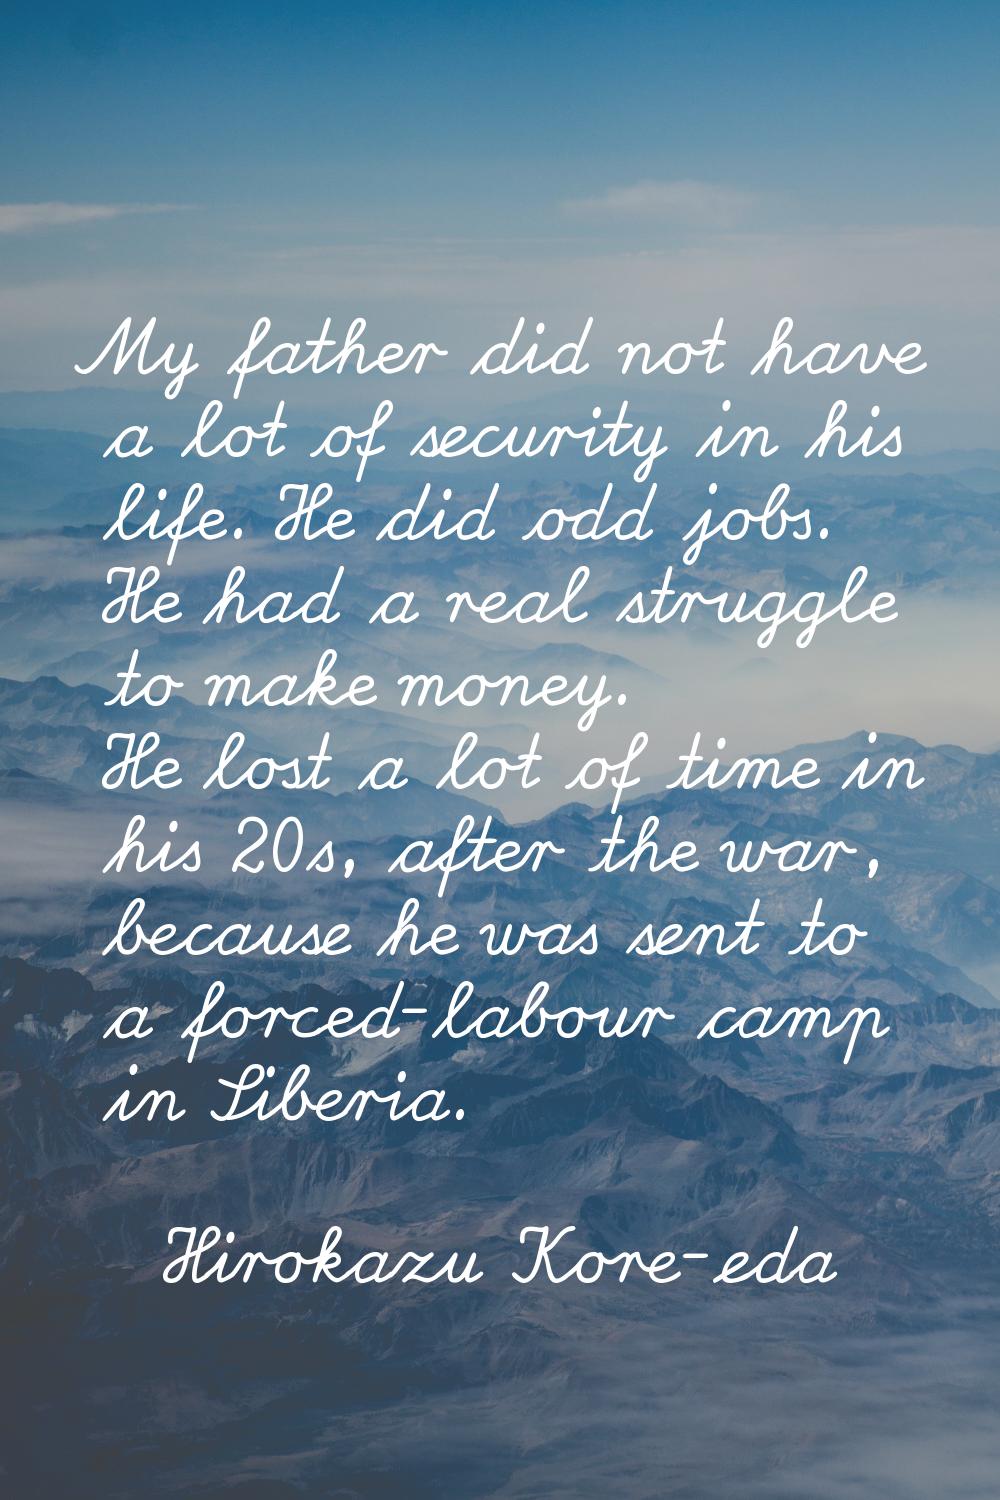 My father did not have a lot of security in his life. He did odd jobs. He had a real struggle to ma